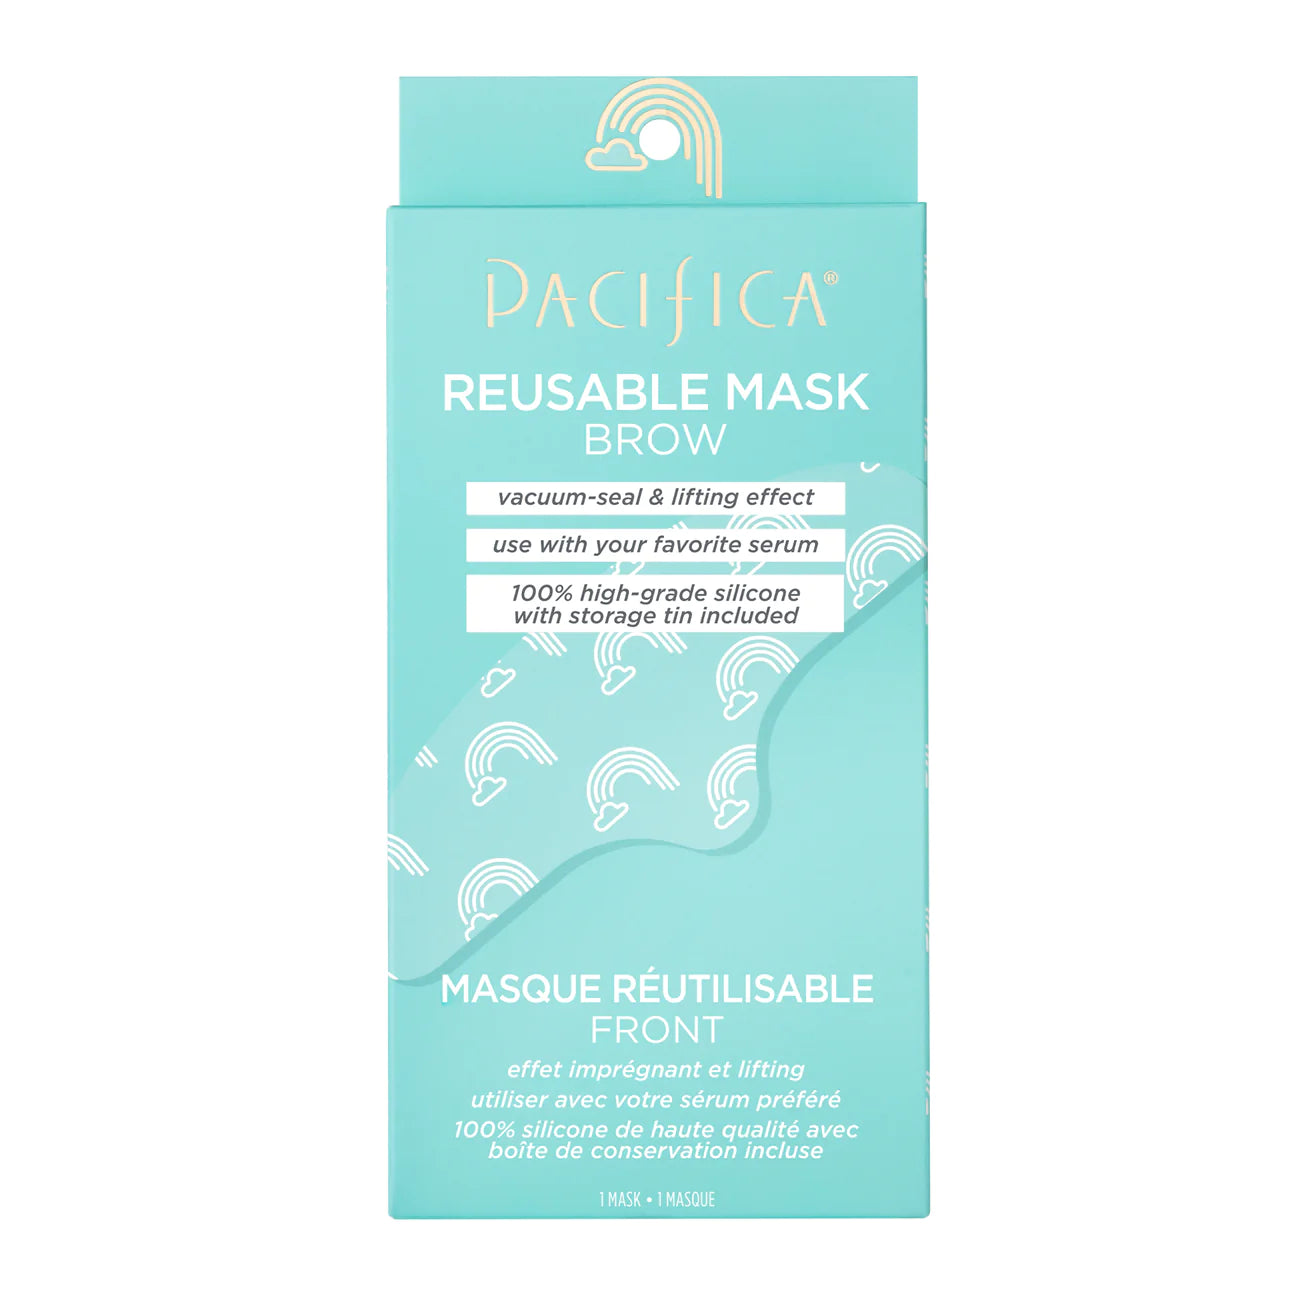 Pacifica Reusable Masks - Forehead Brow